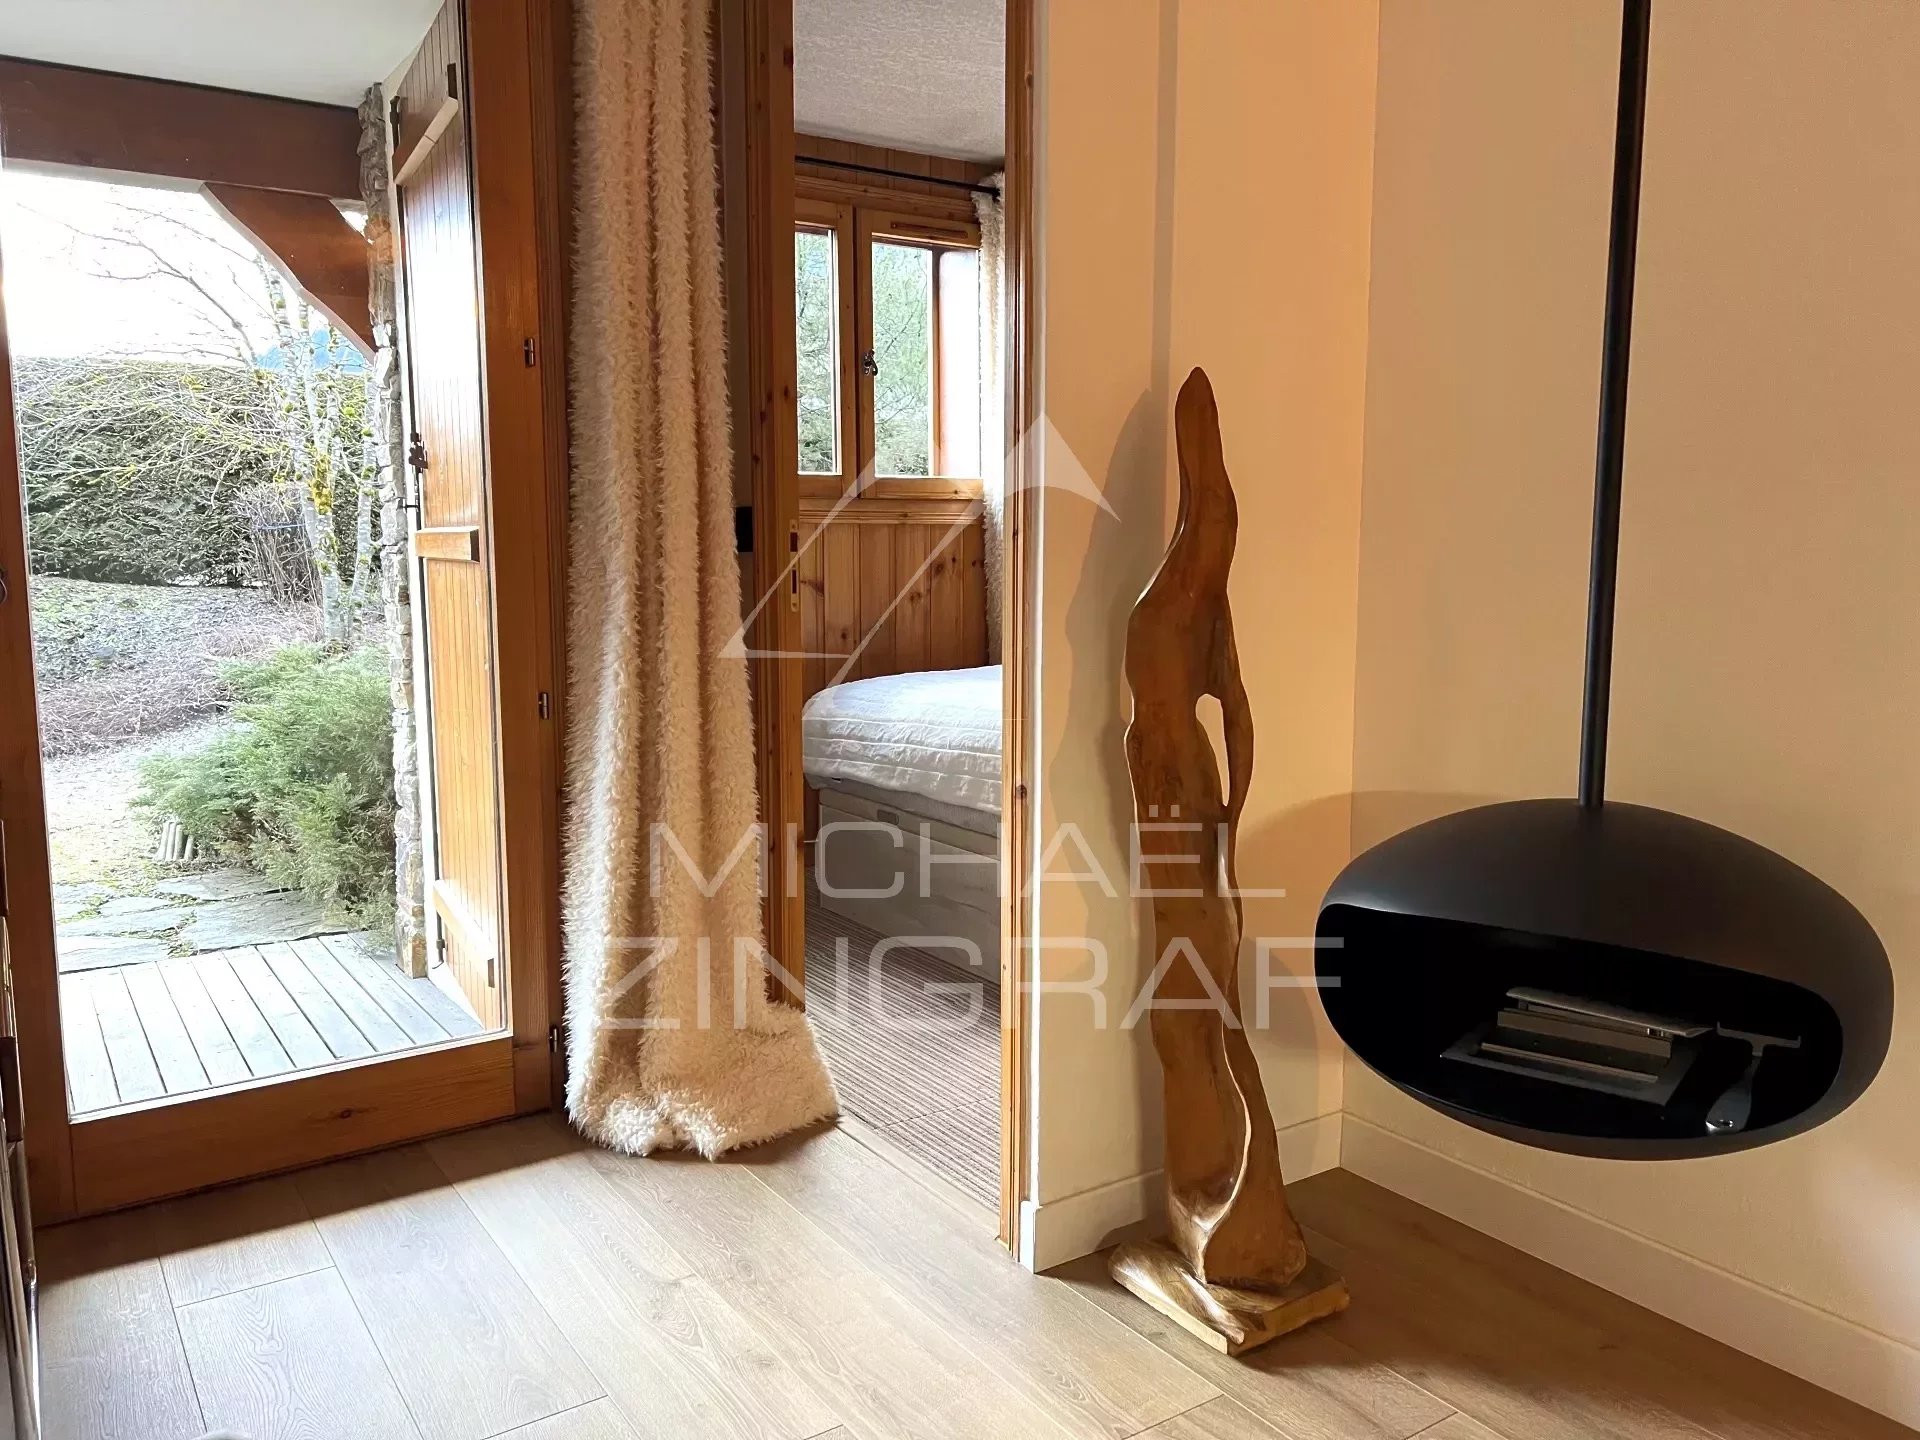 Charming renovated pied-à-terre on garden level, within walking distance of the centre